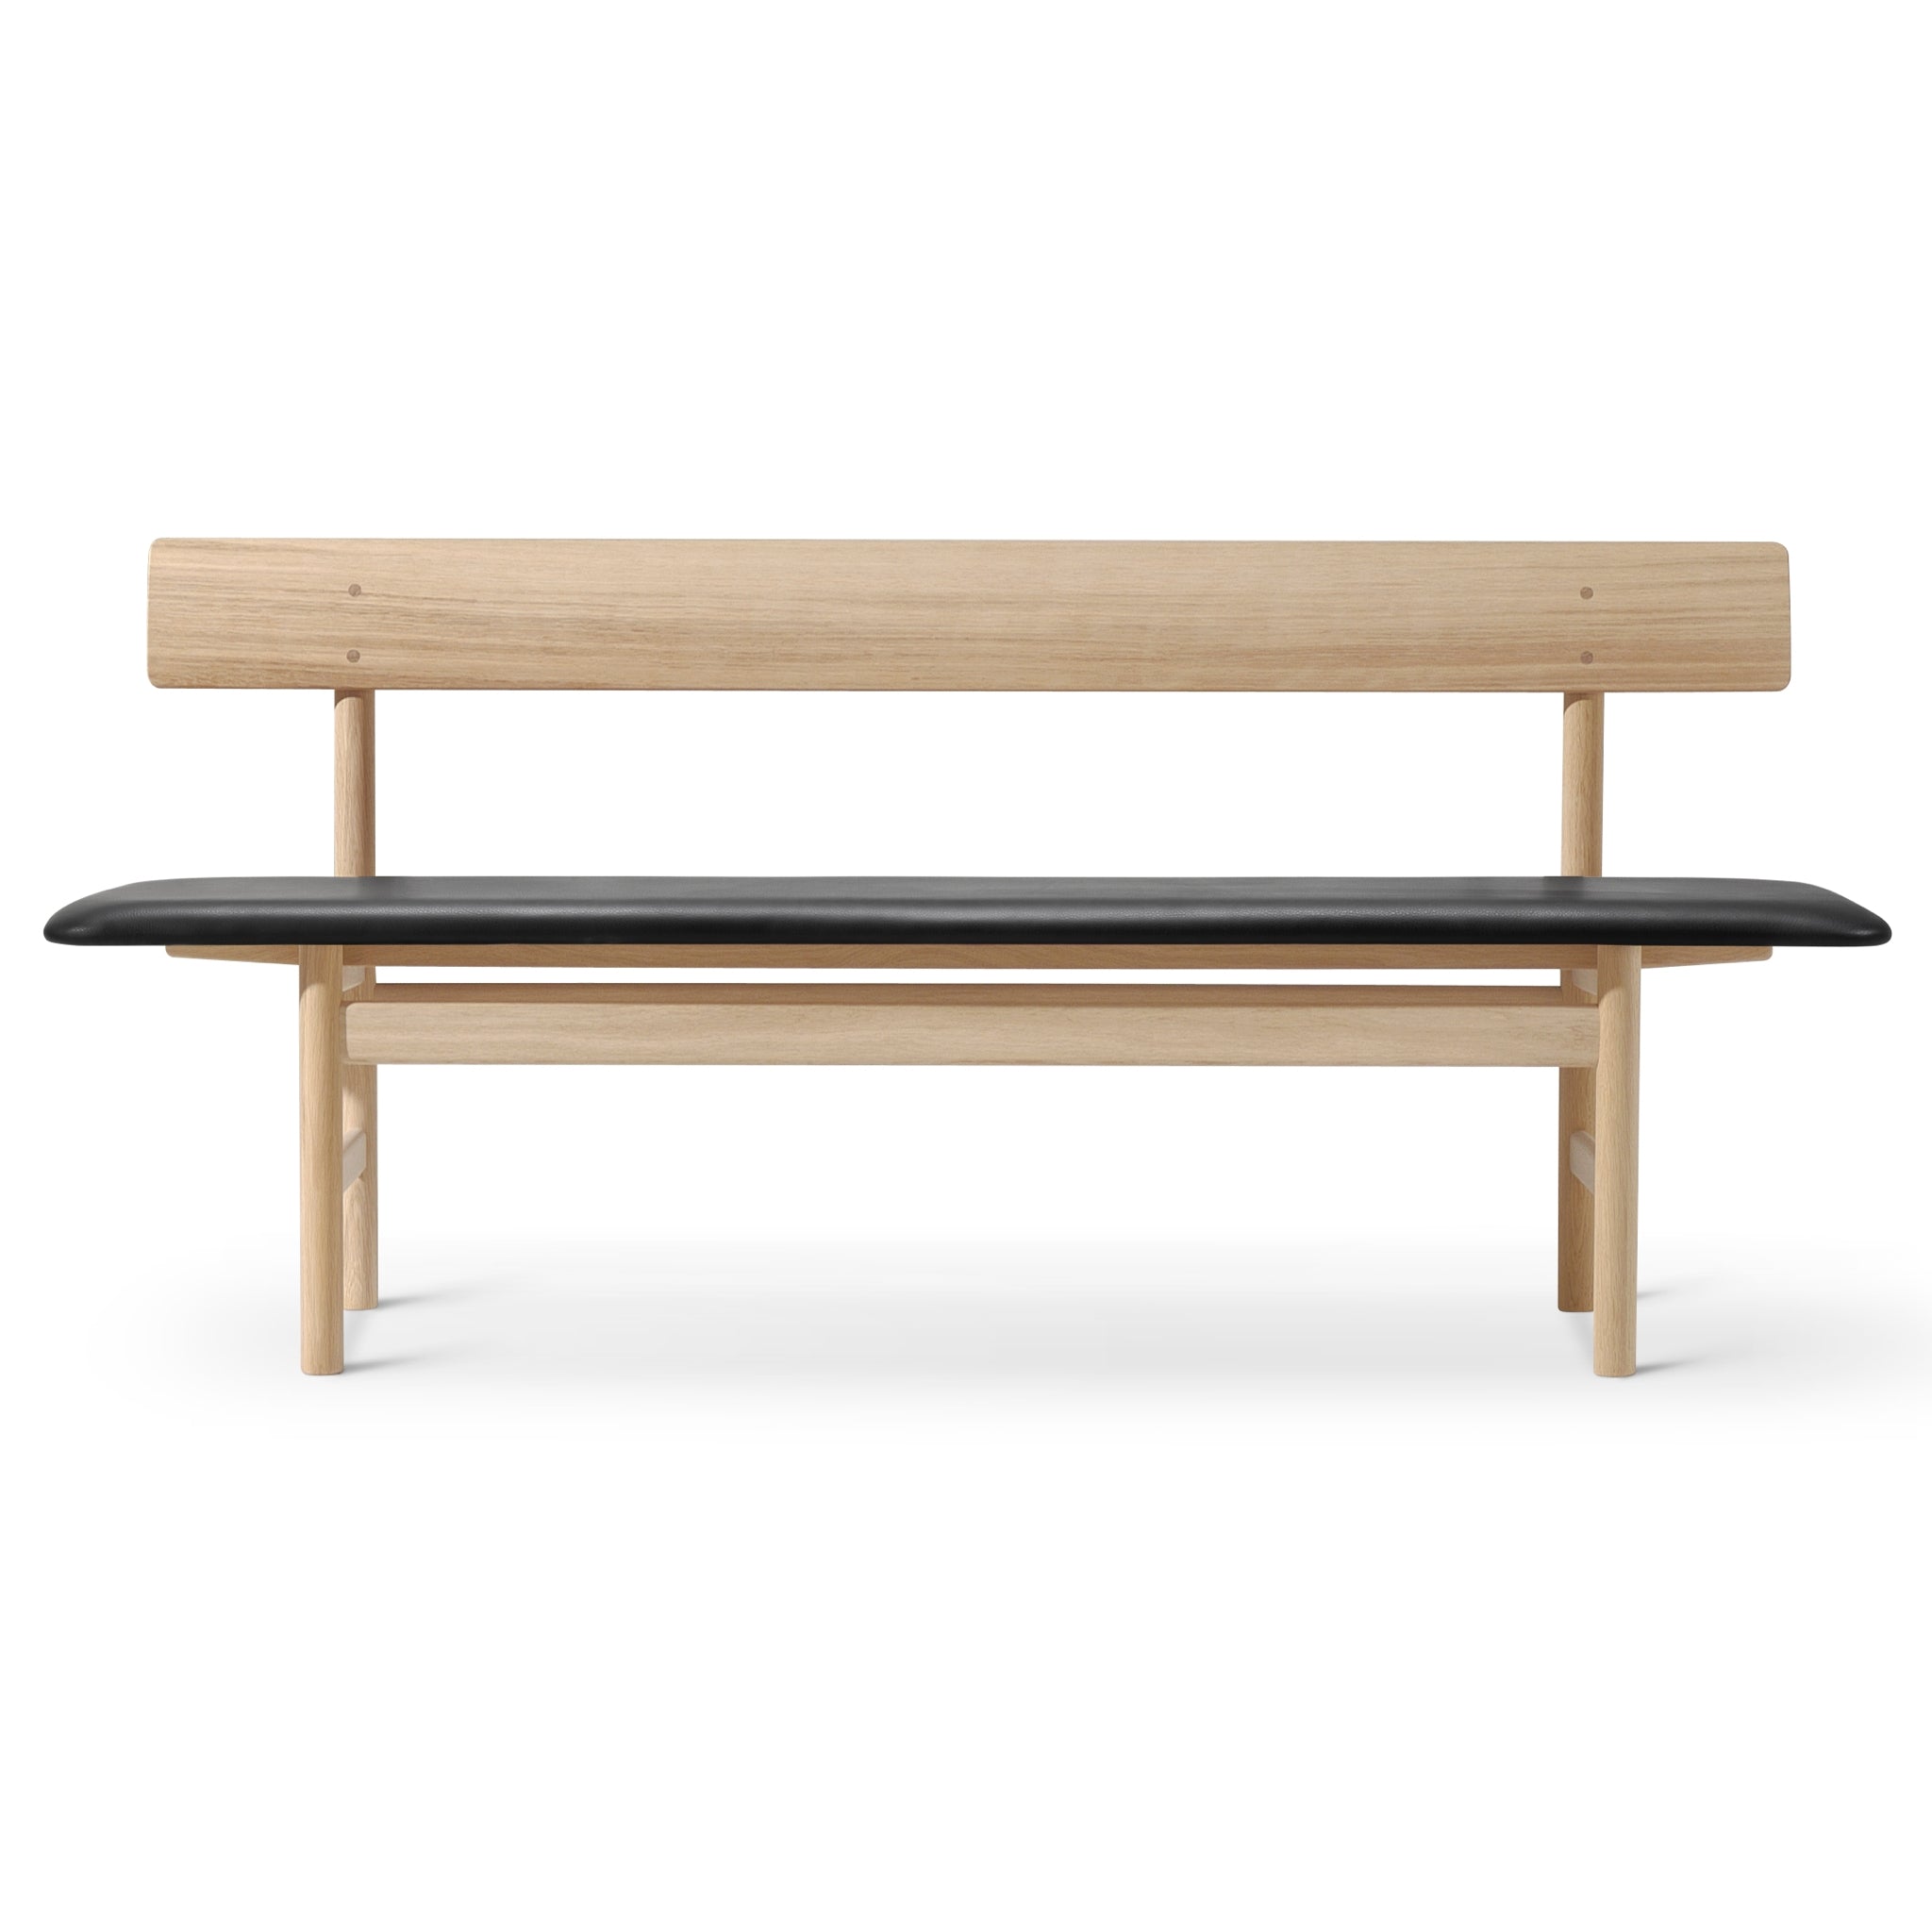 The Mogensen Bench 3171 by Fredericia